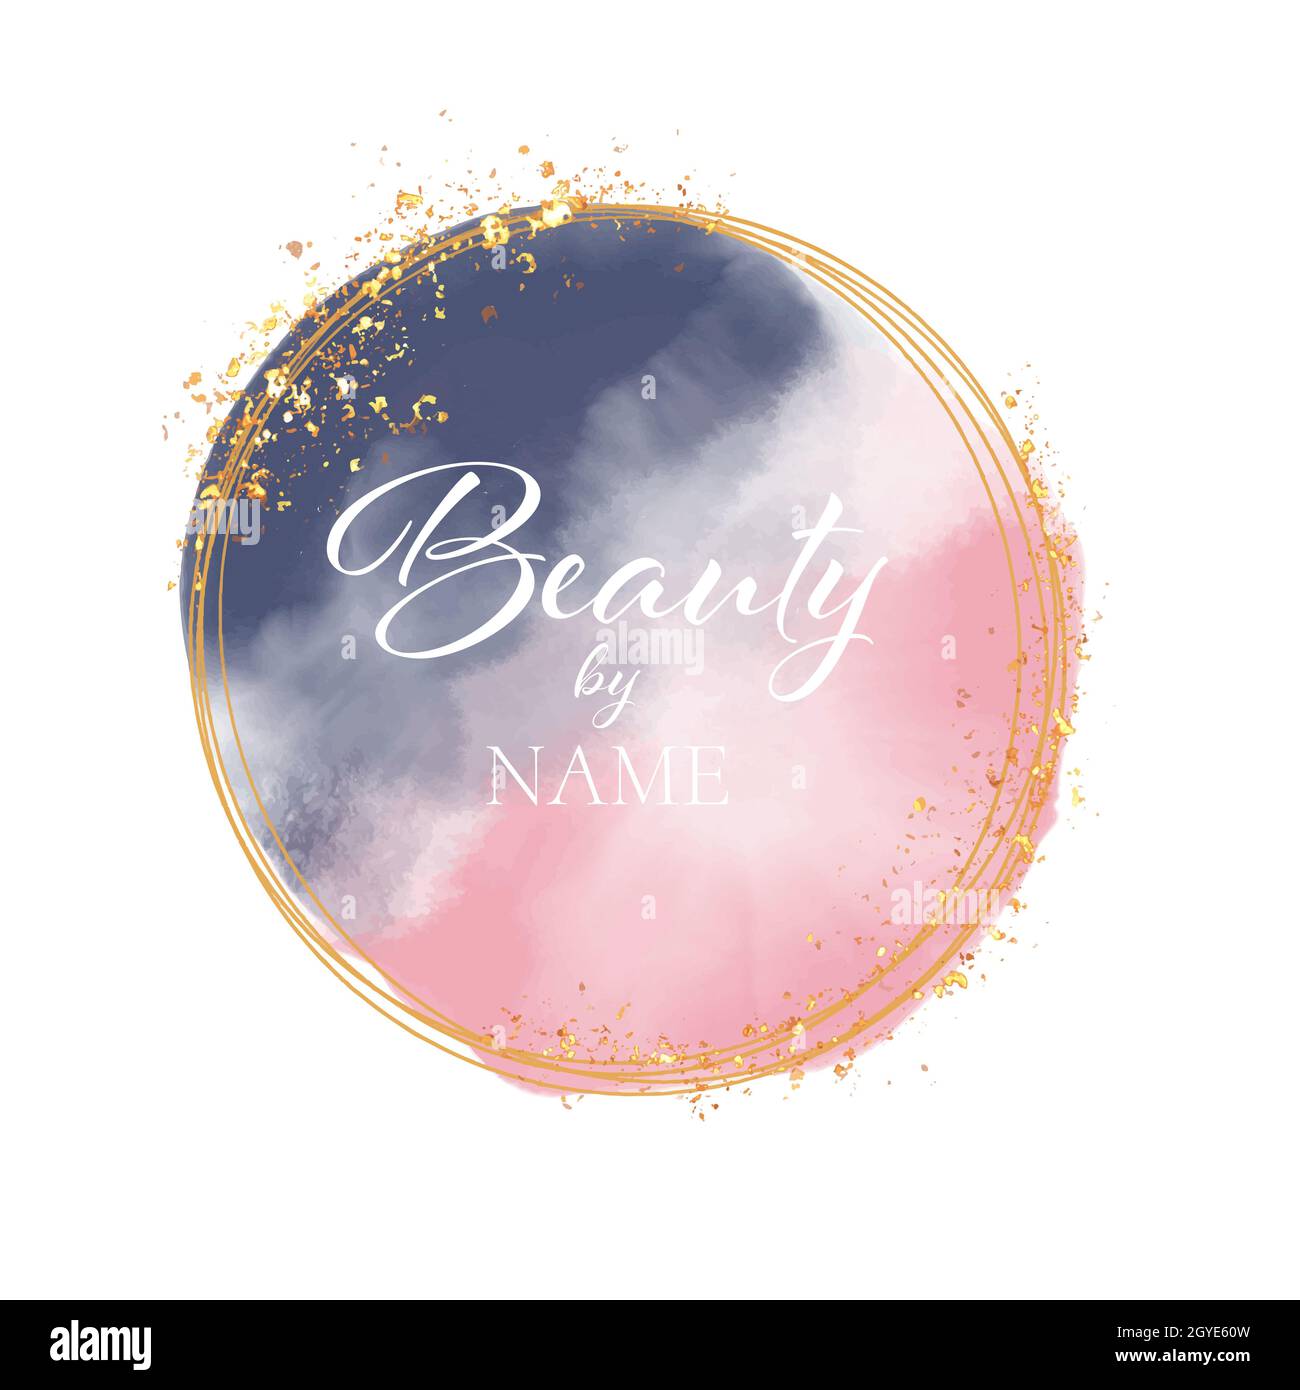 Beauty salon logo with a watercolour and gold glitter design Stock Photo